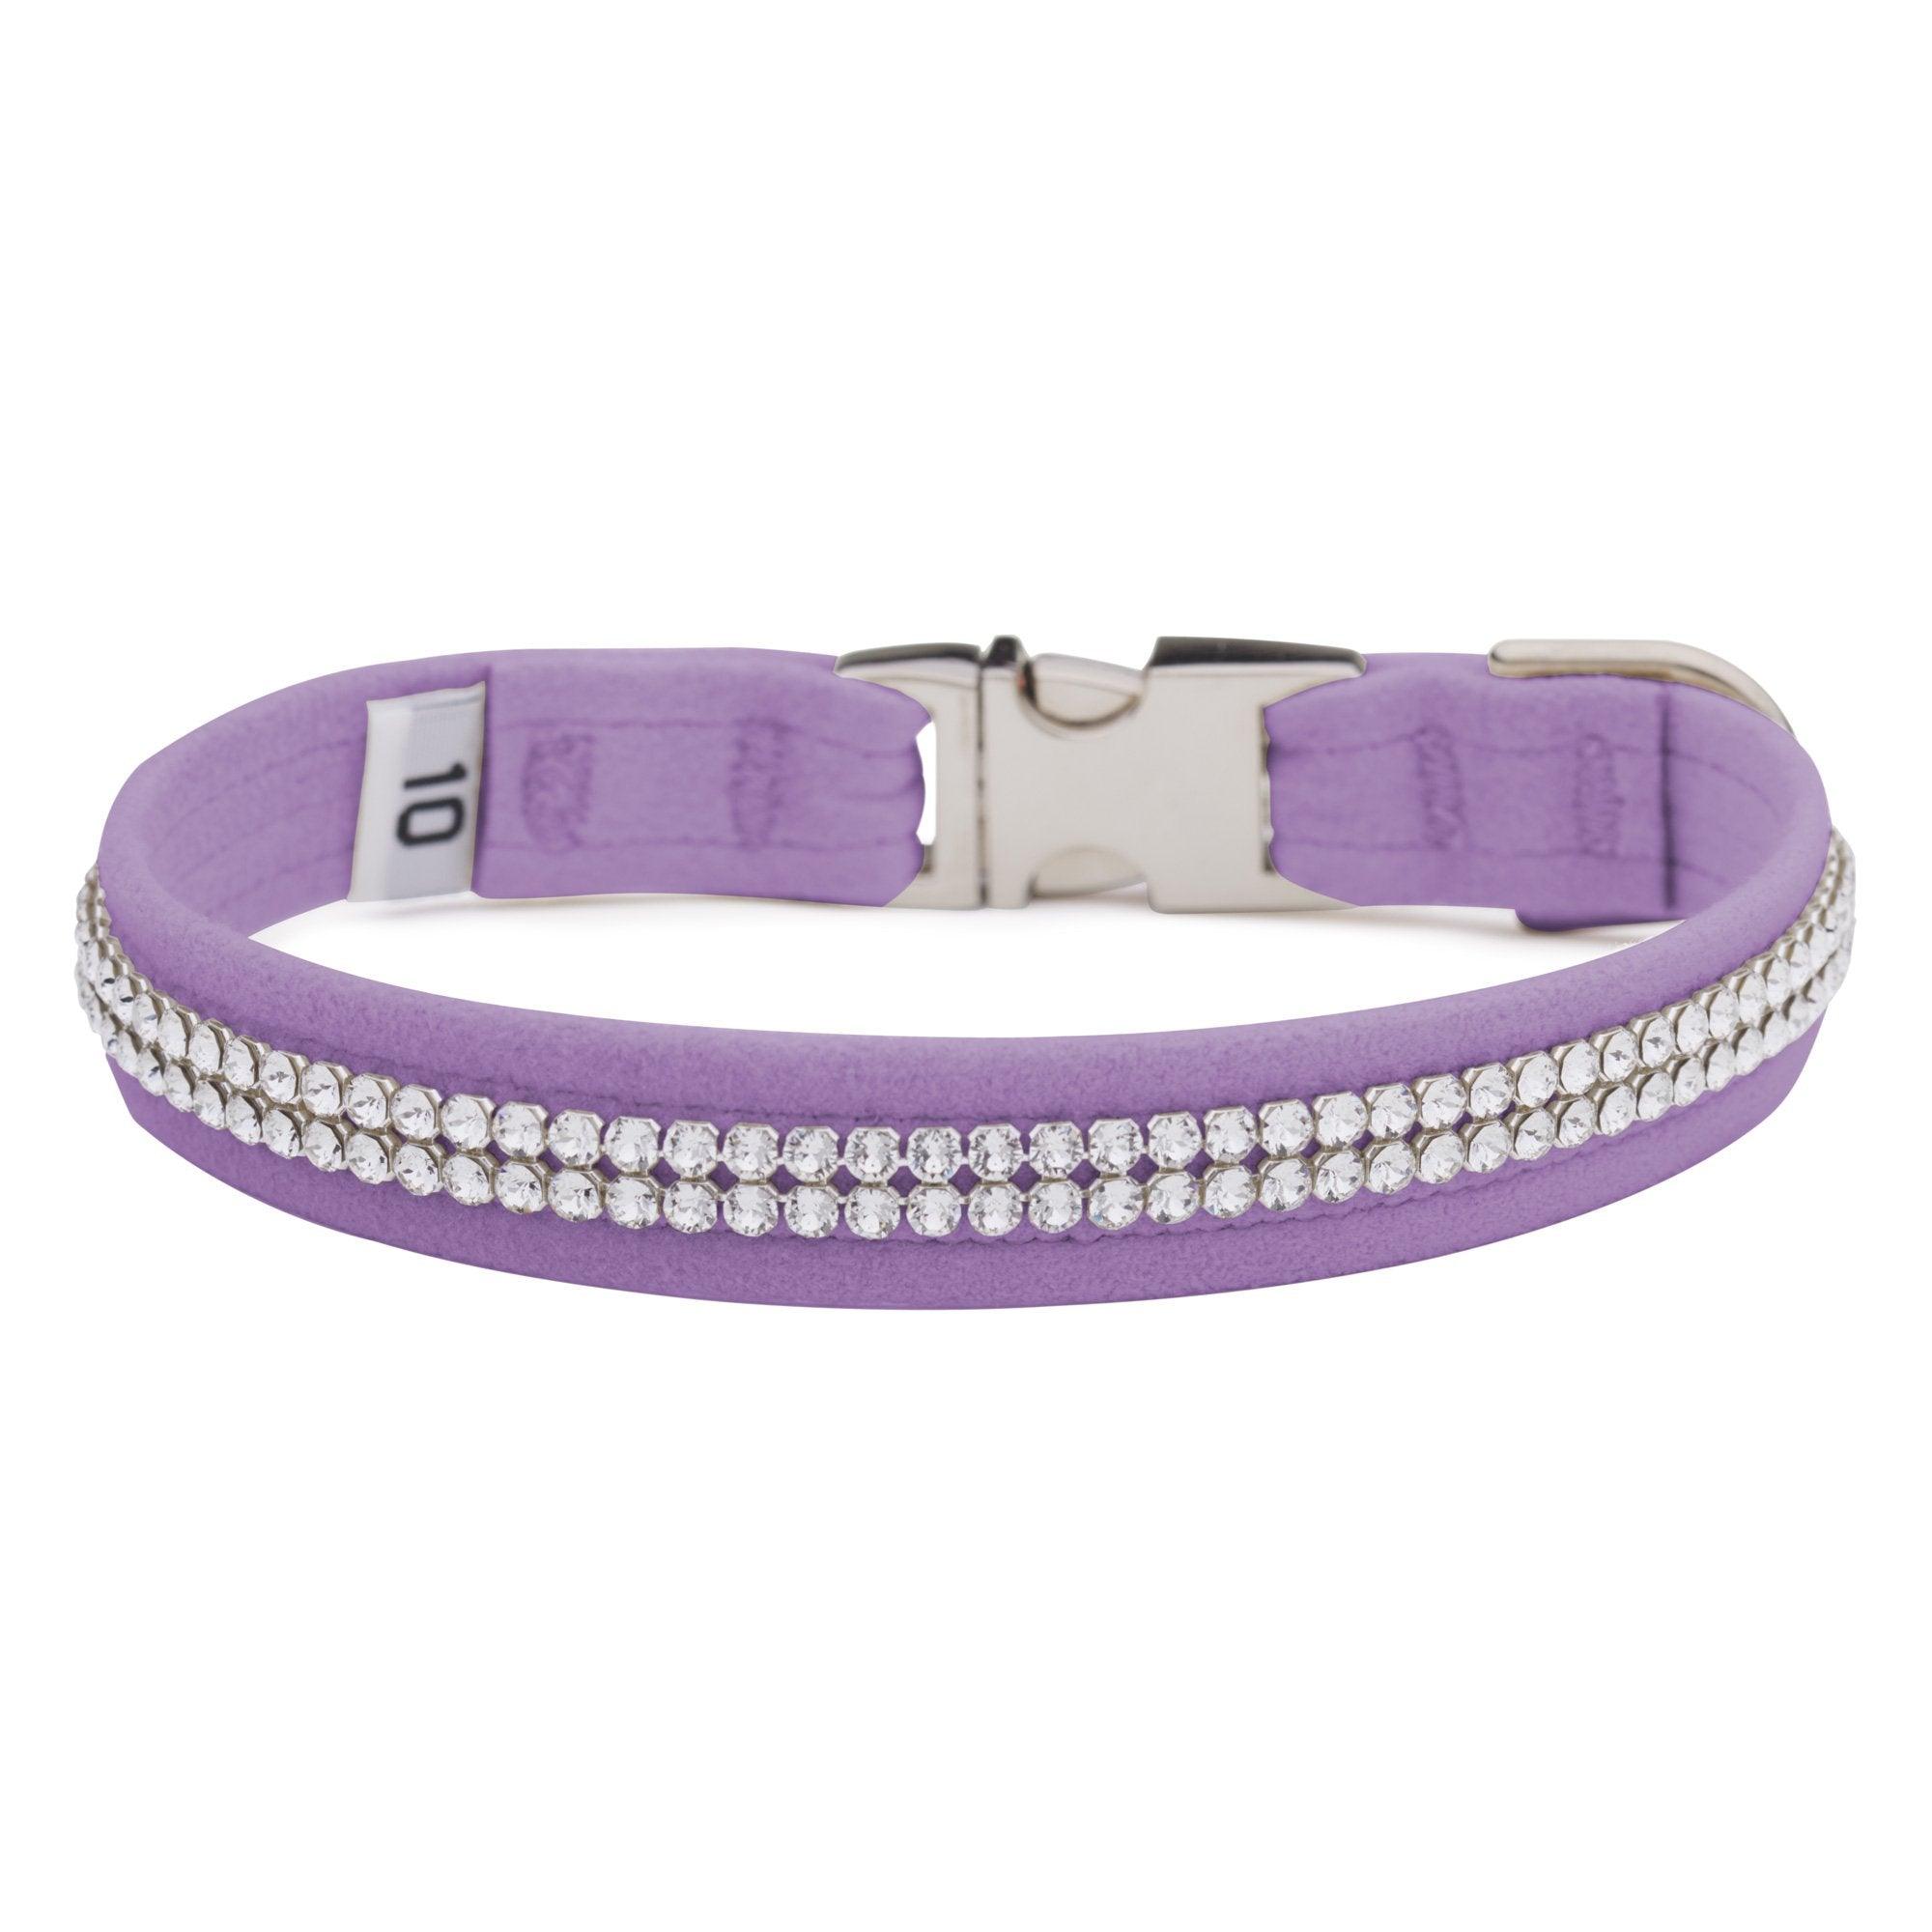 French Lavender 2 Row Giltmore Perfect Fit Collar - Rocky & Maggie's Pet Boutique and Salon